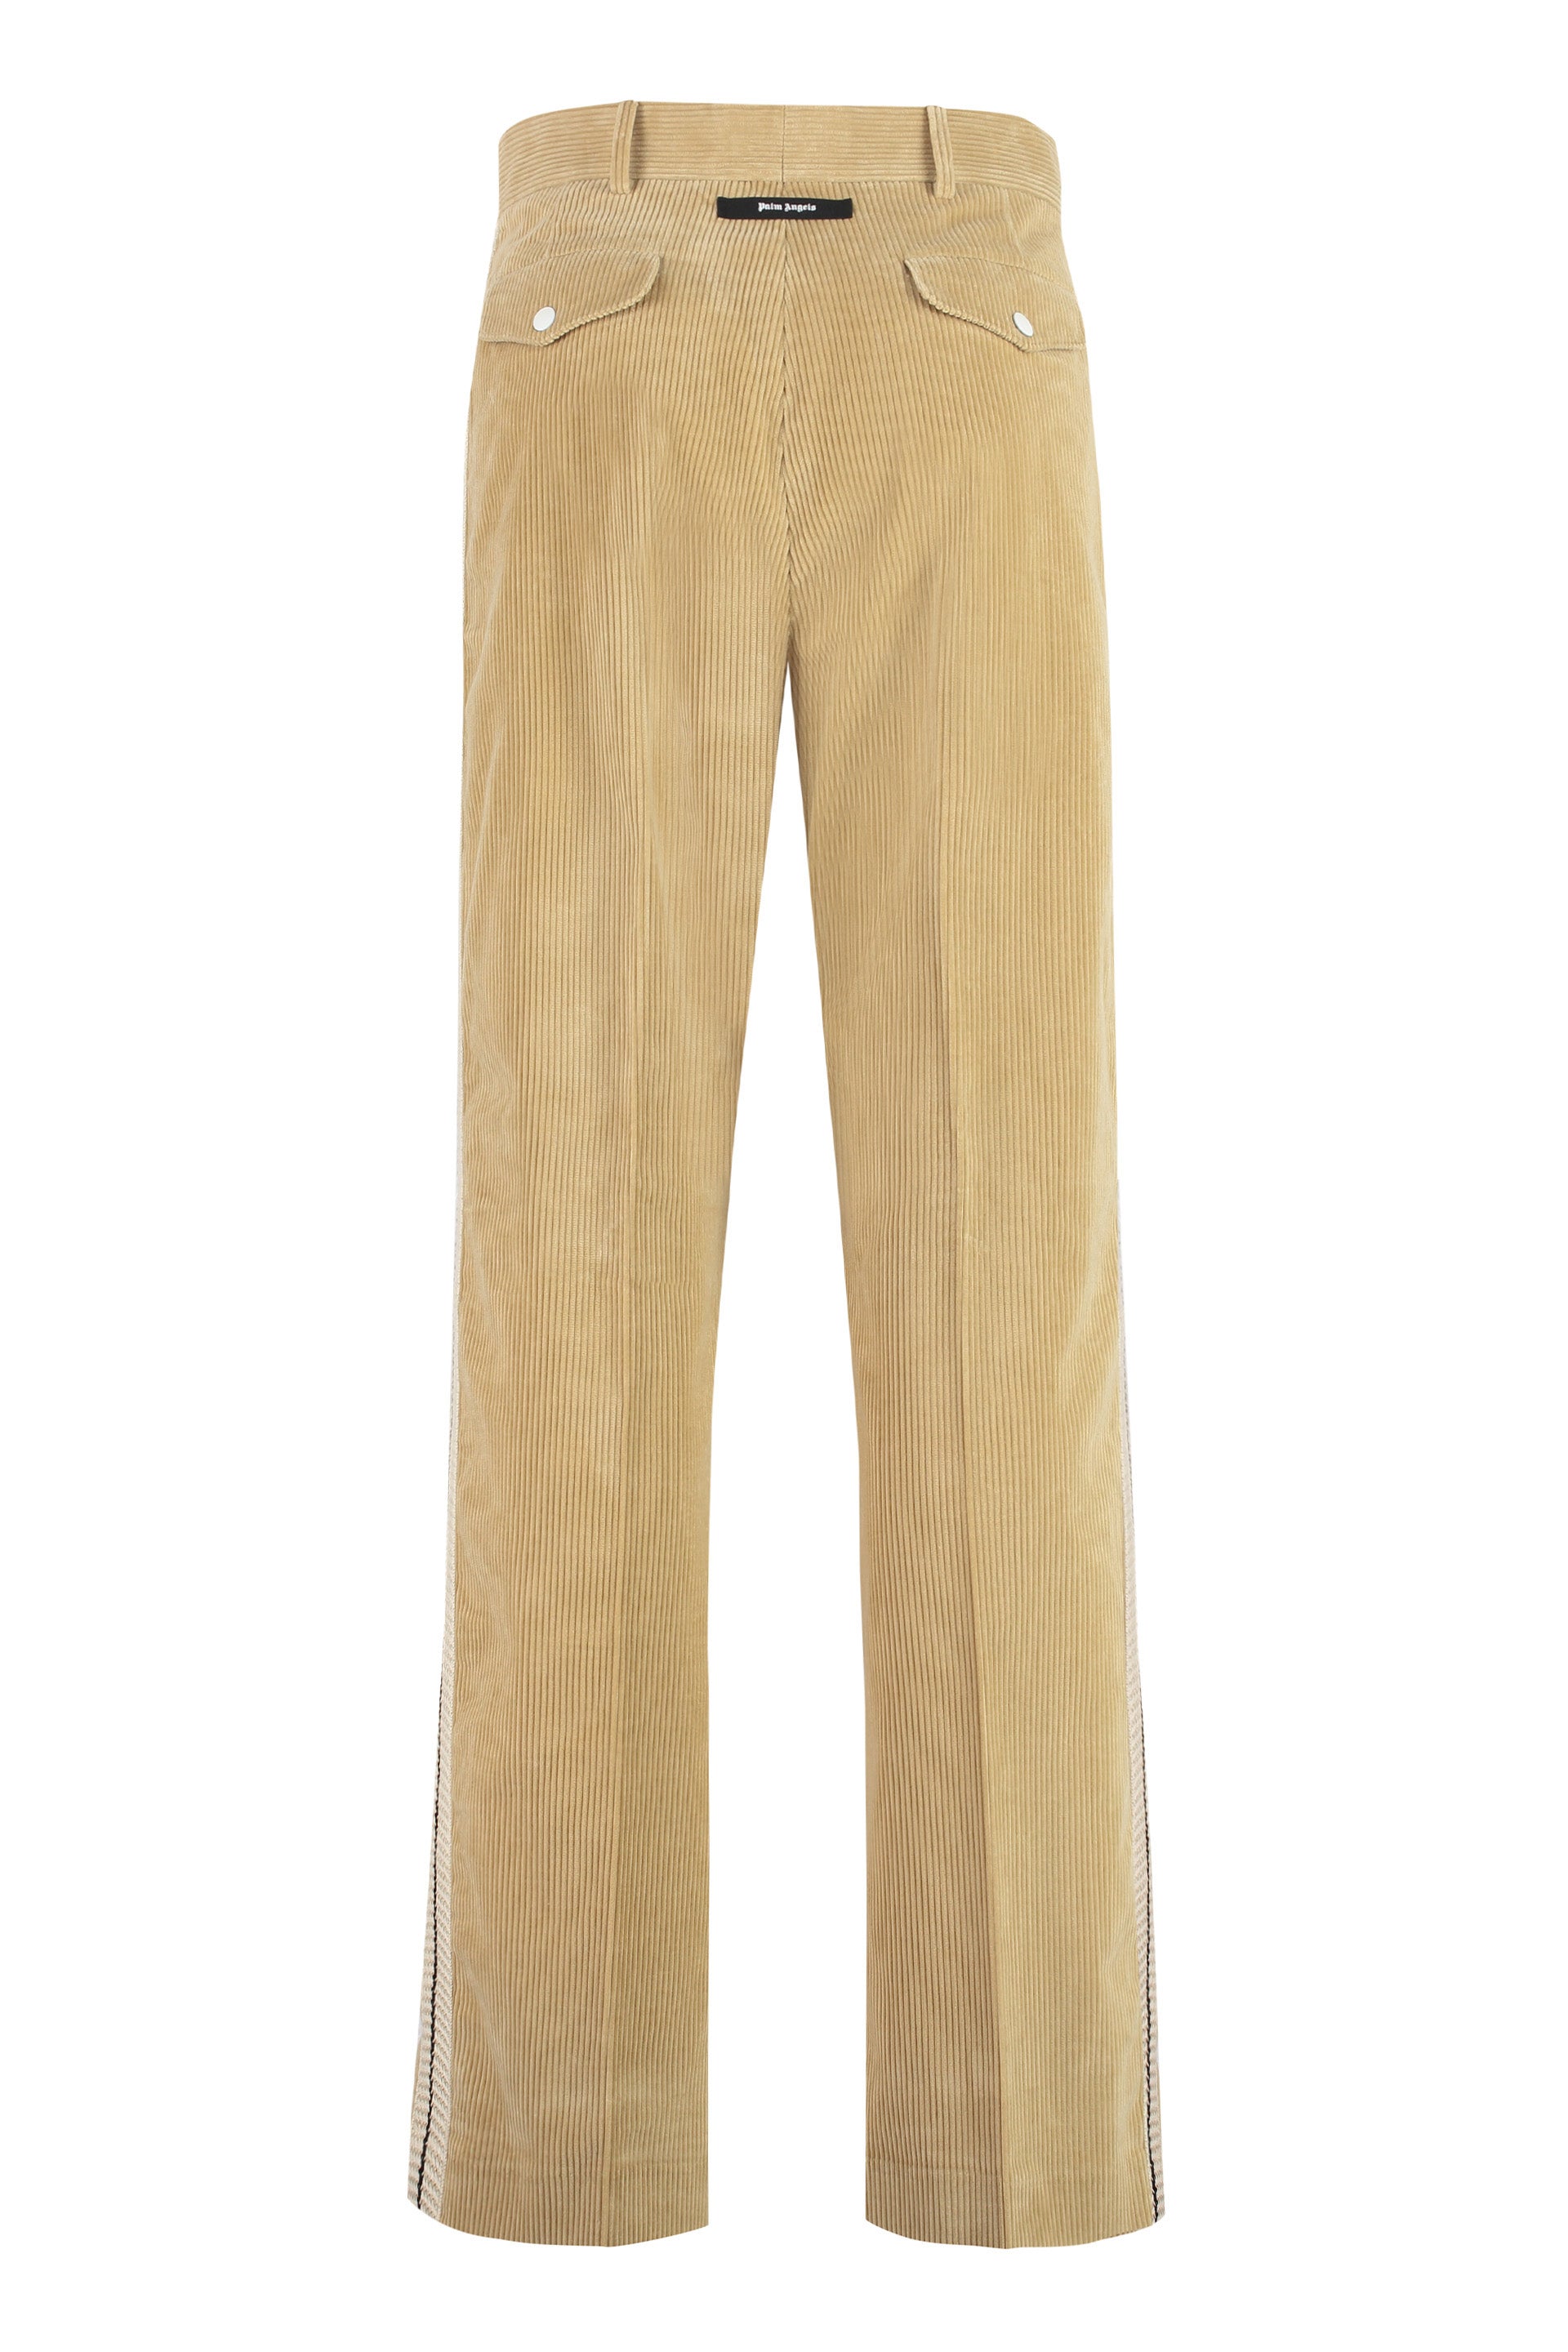 Shop Palm Angels Beige Corduroy Trousers With Contrasting Color Stripe For Men